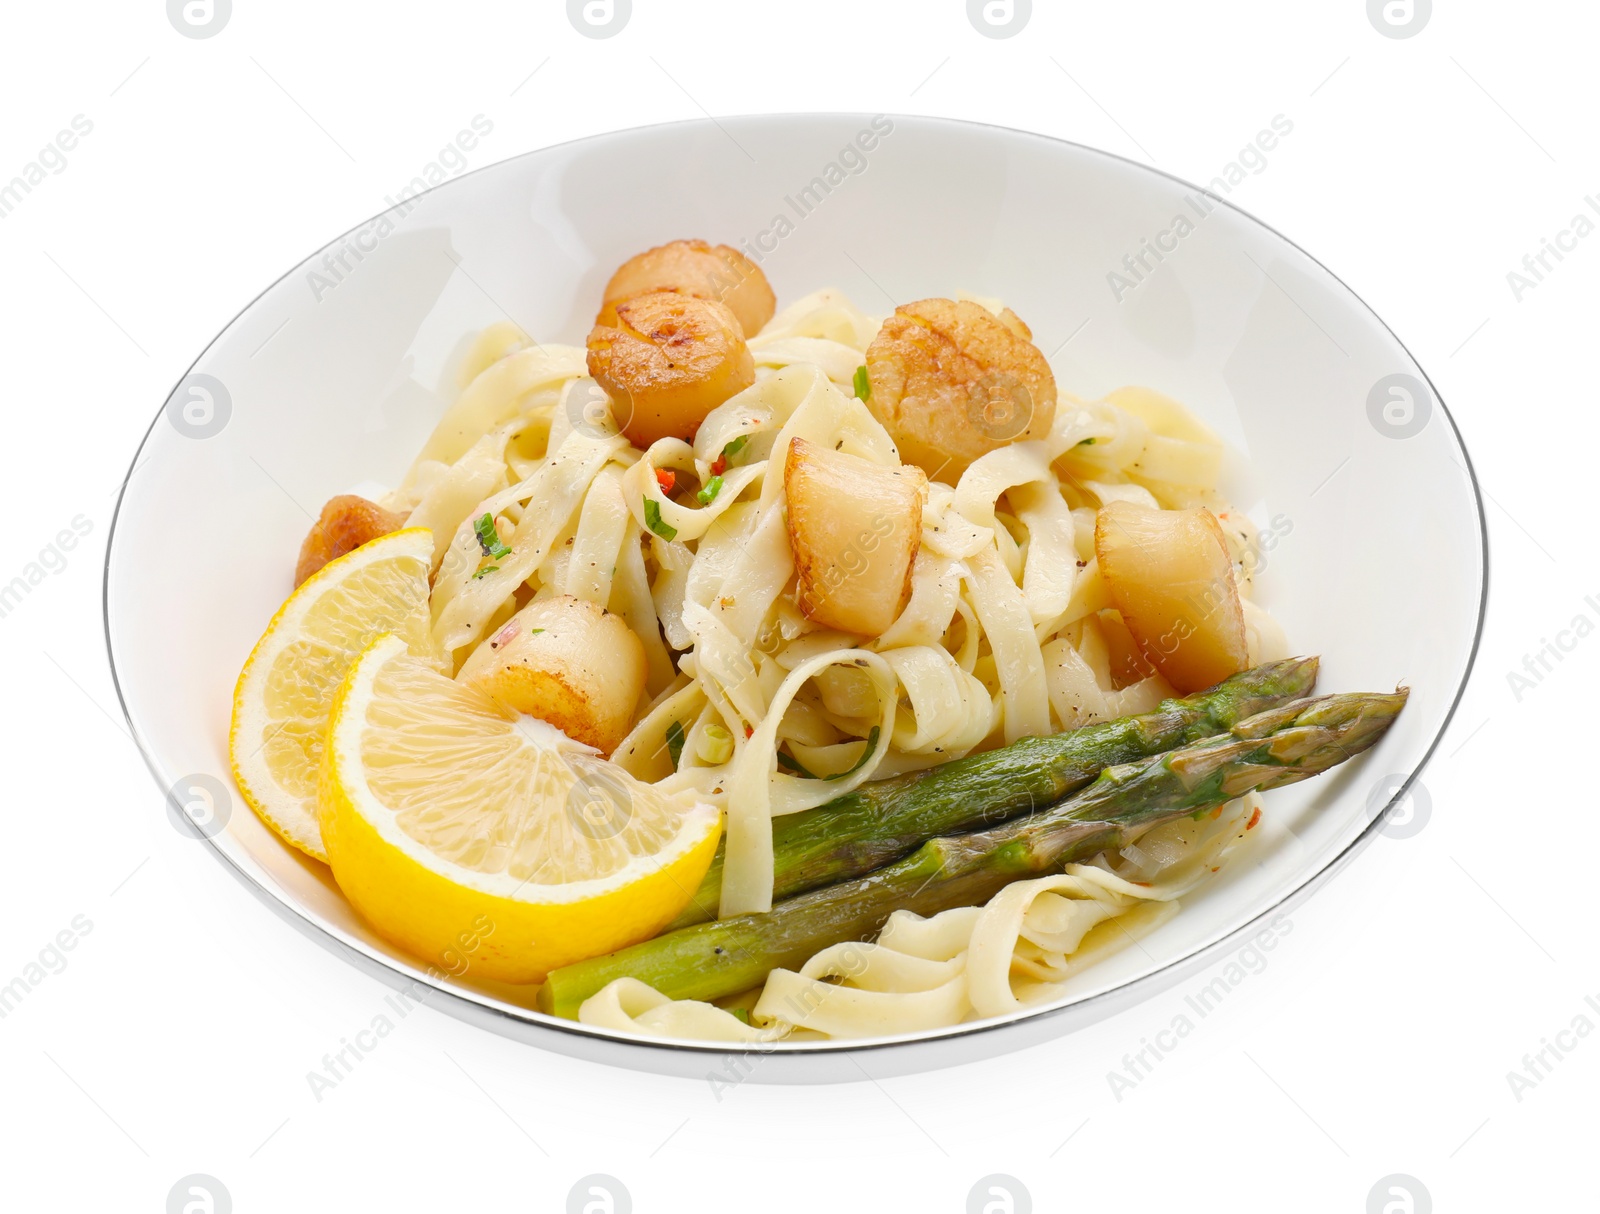 Photo of Delicious scallop pasta with asparagus and lemon isolated on white